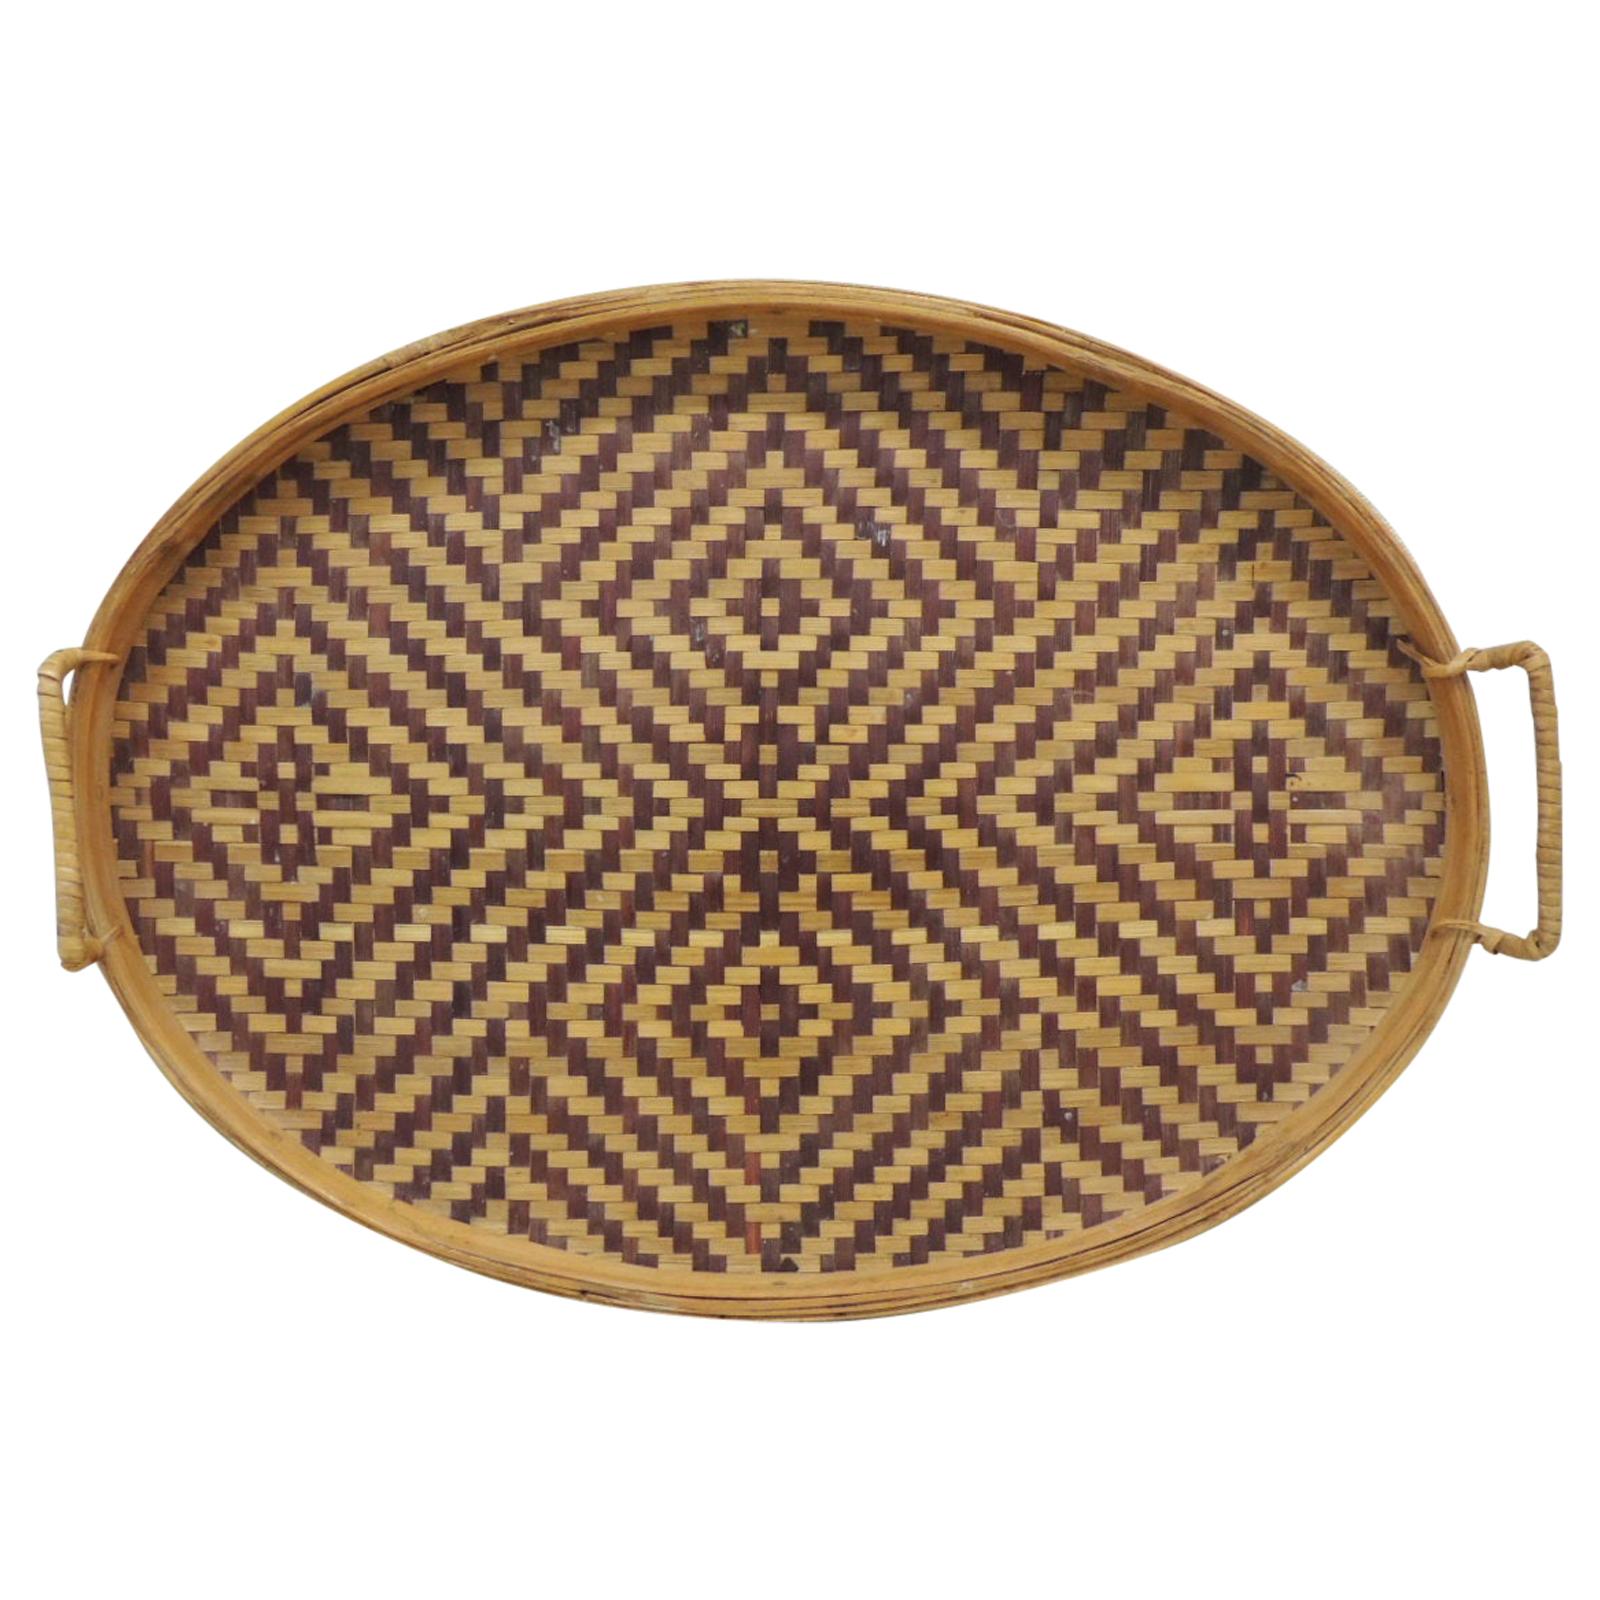 Vintage Oval Rattan and Bamboo Serving Tray with Handles